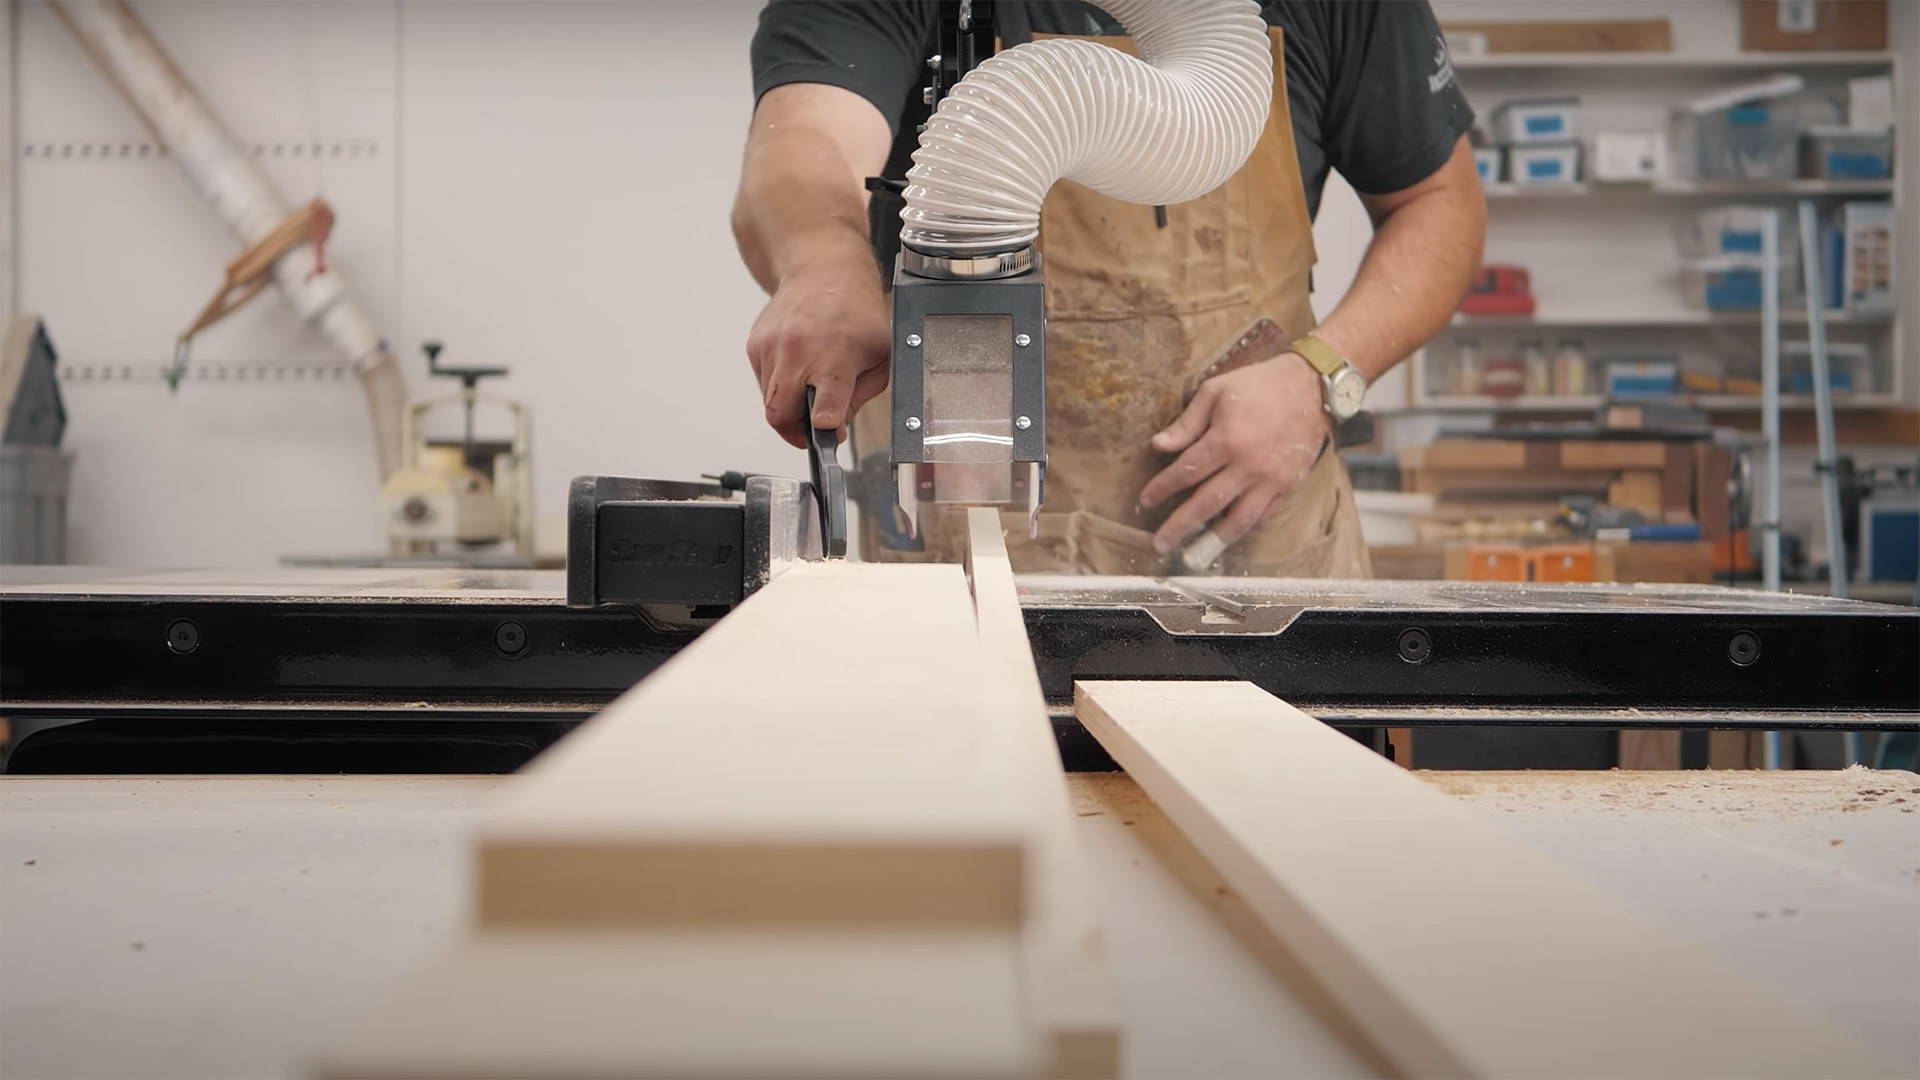 ripping plywood on a table saw